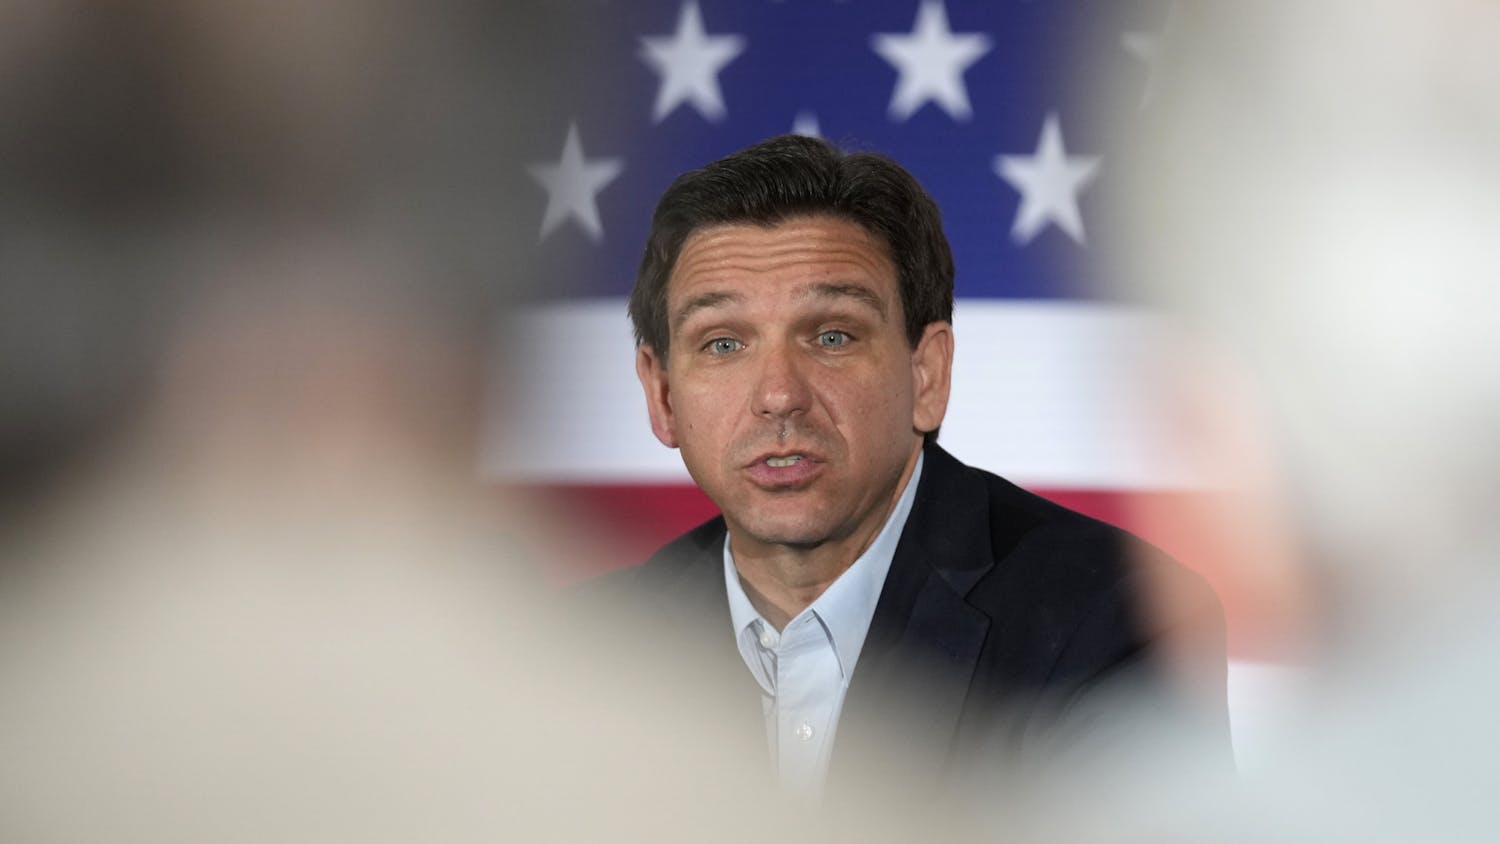 Florida Gov. Ron DeSantis speaks at a political roundtable, Friday, May 19, 2023, in Bedford, N.H. (AP Photo/Robert F. Bukaty)